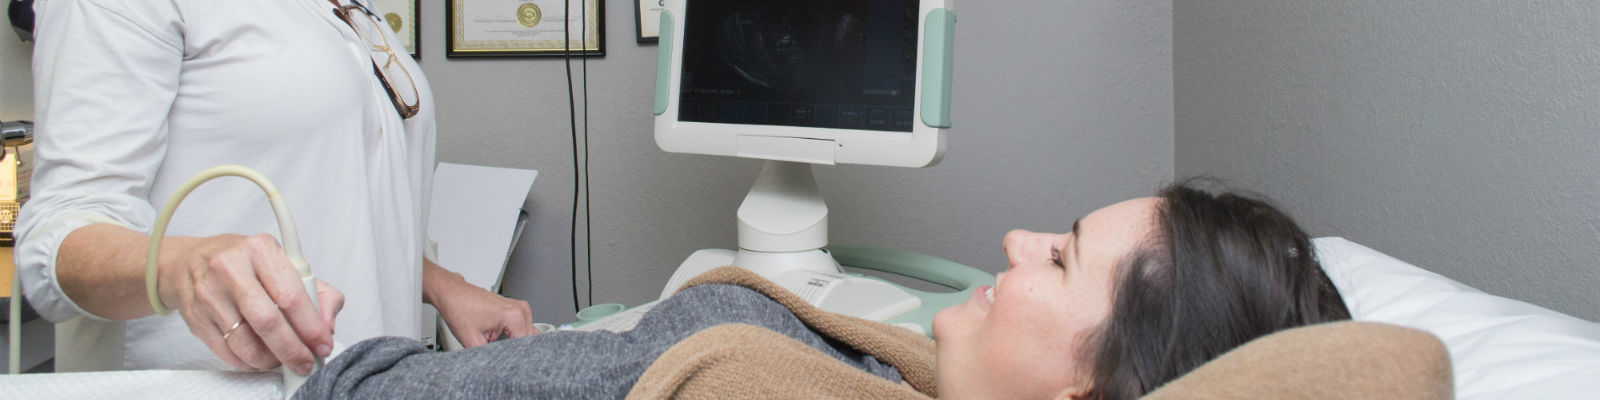 Birth Choice offers free ultrasounds and other services